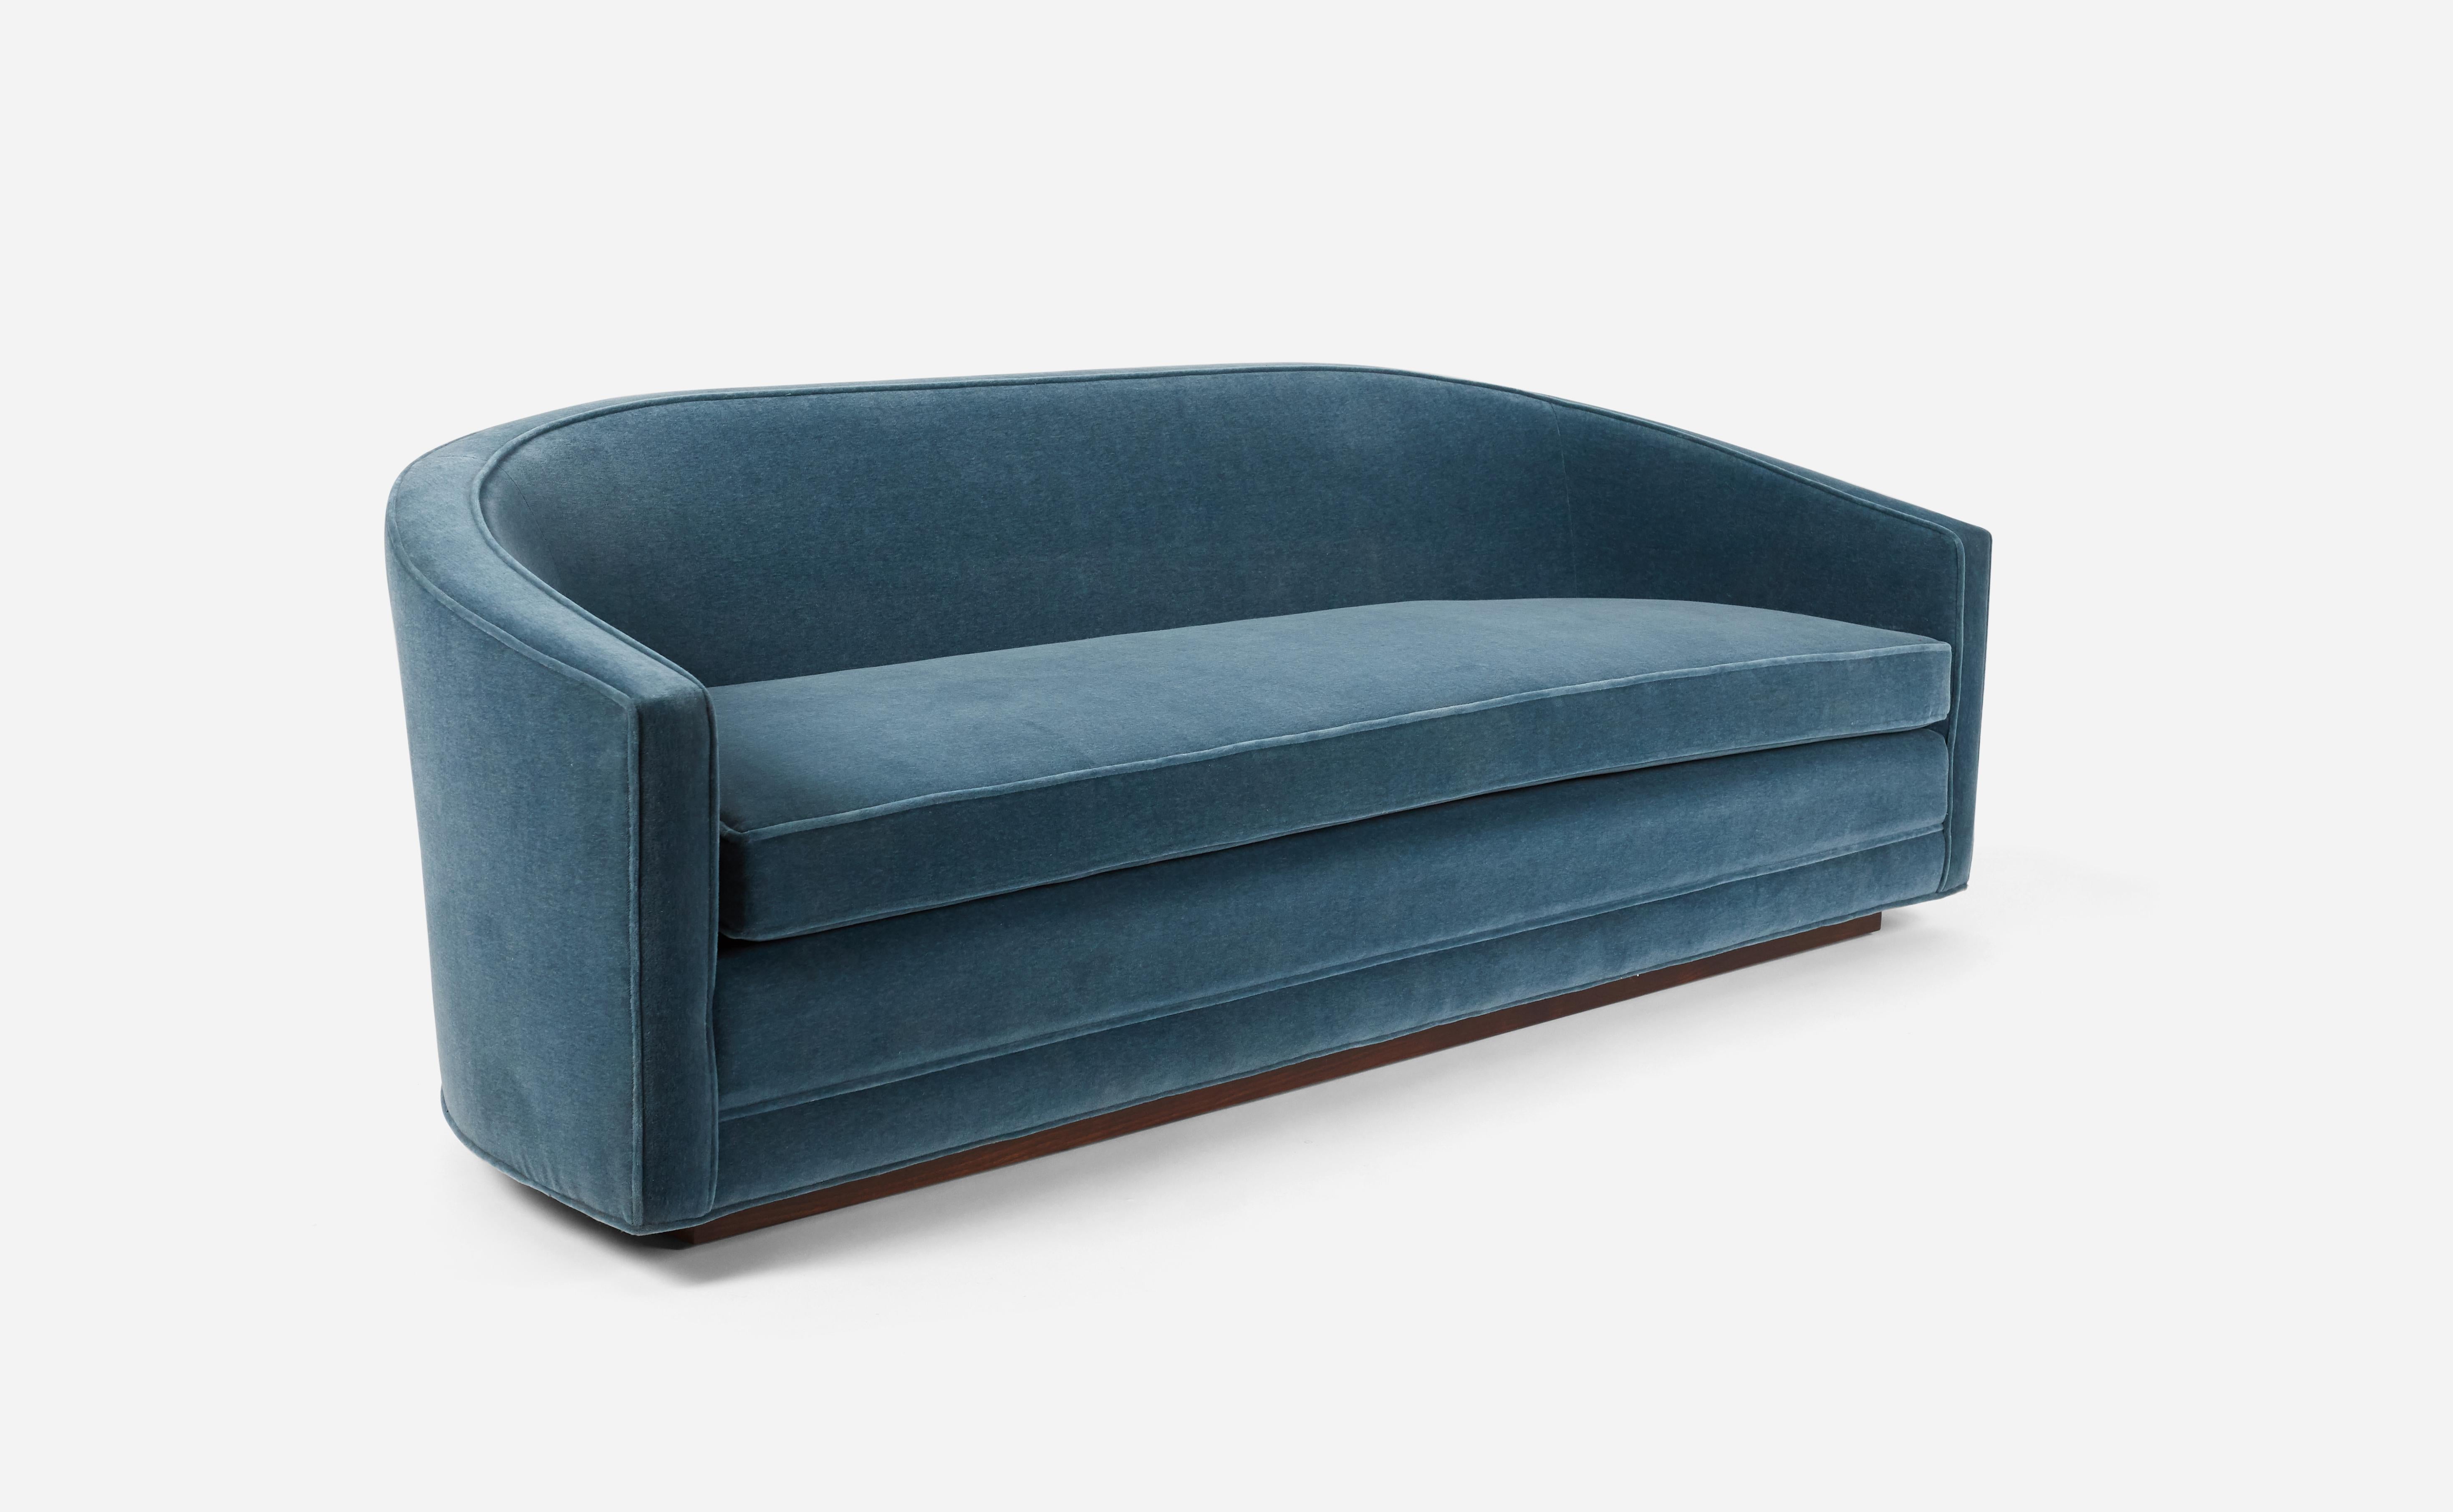 Barrel back sofa by Edward Wormley for Dunbar. Fully restored. Refinished and reupholstered. Gorgeous blue mohair on walnut base.